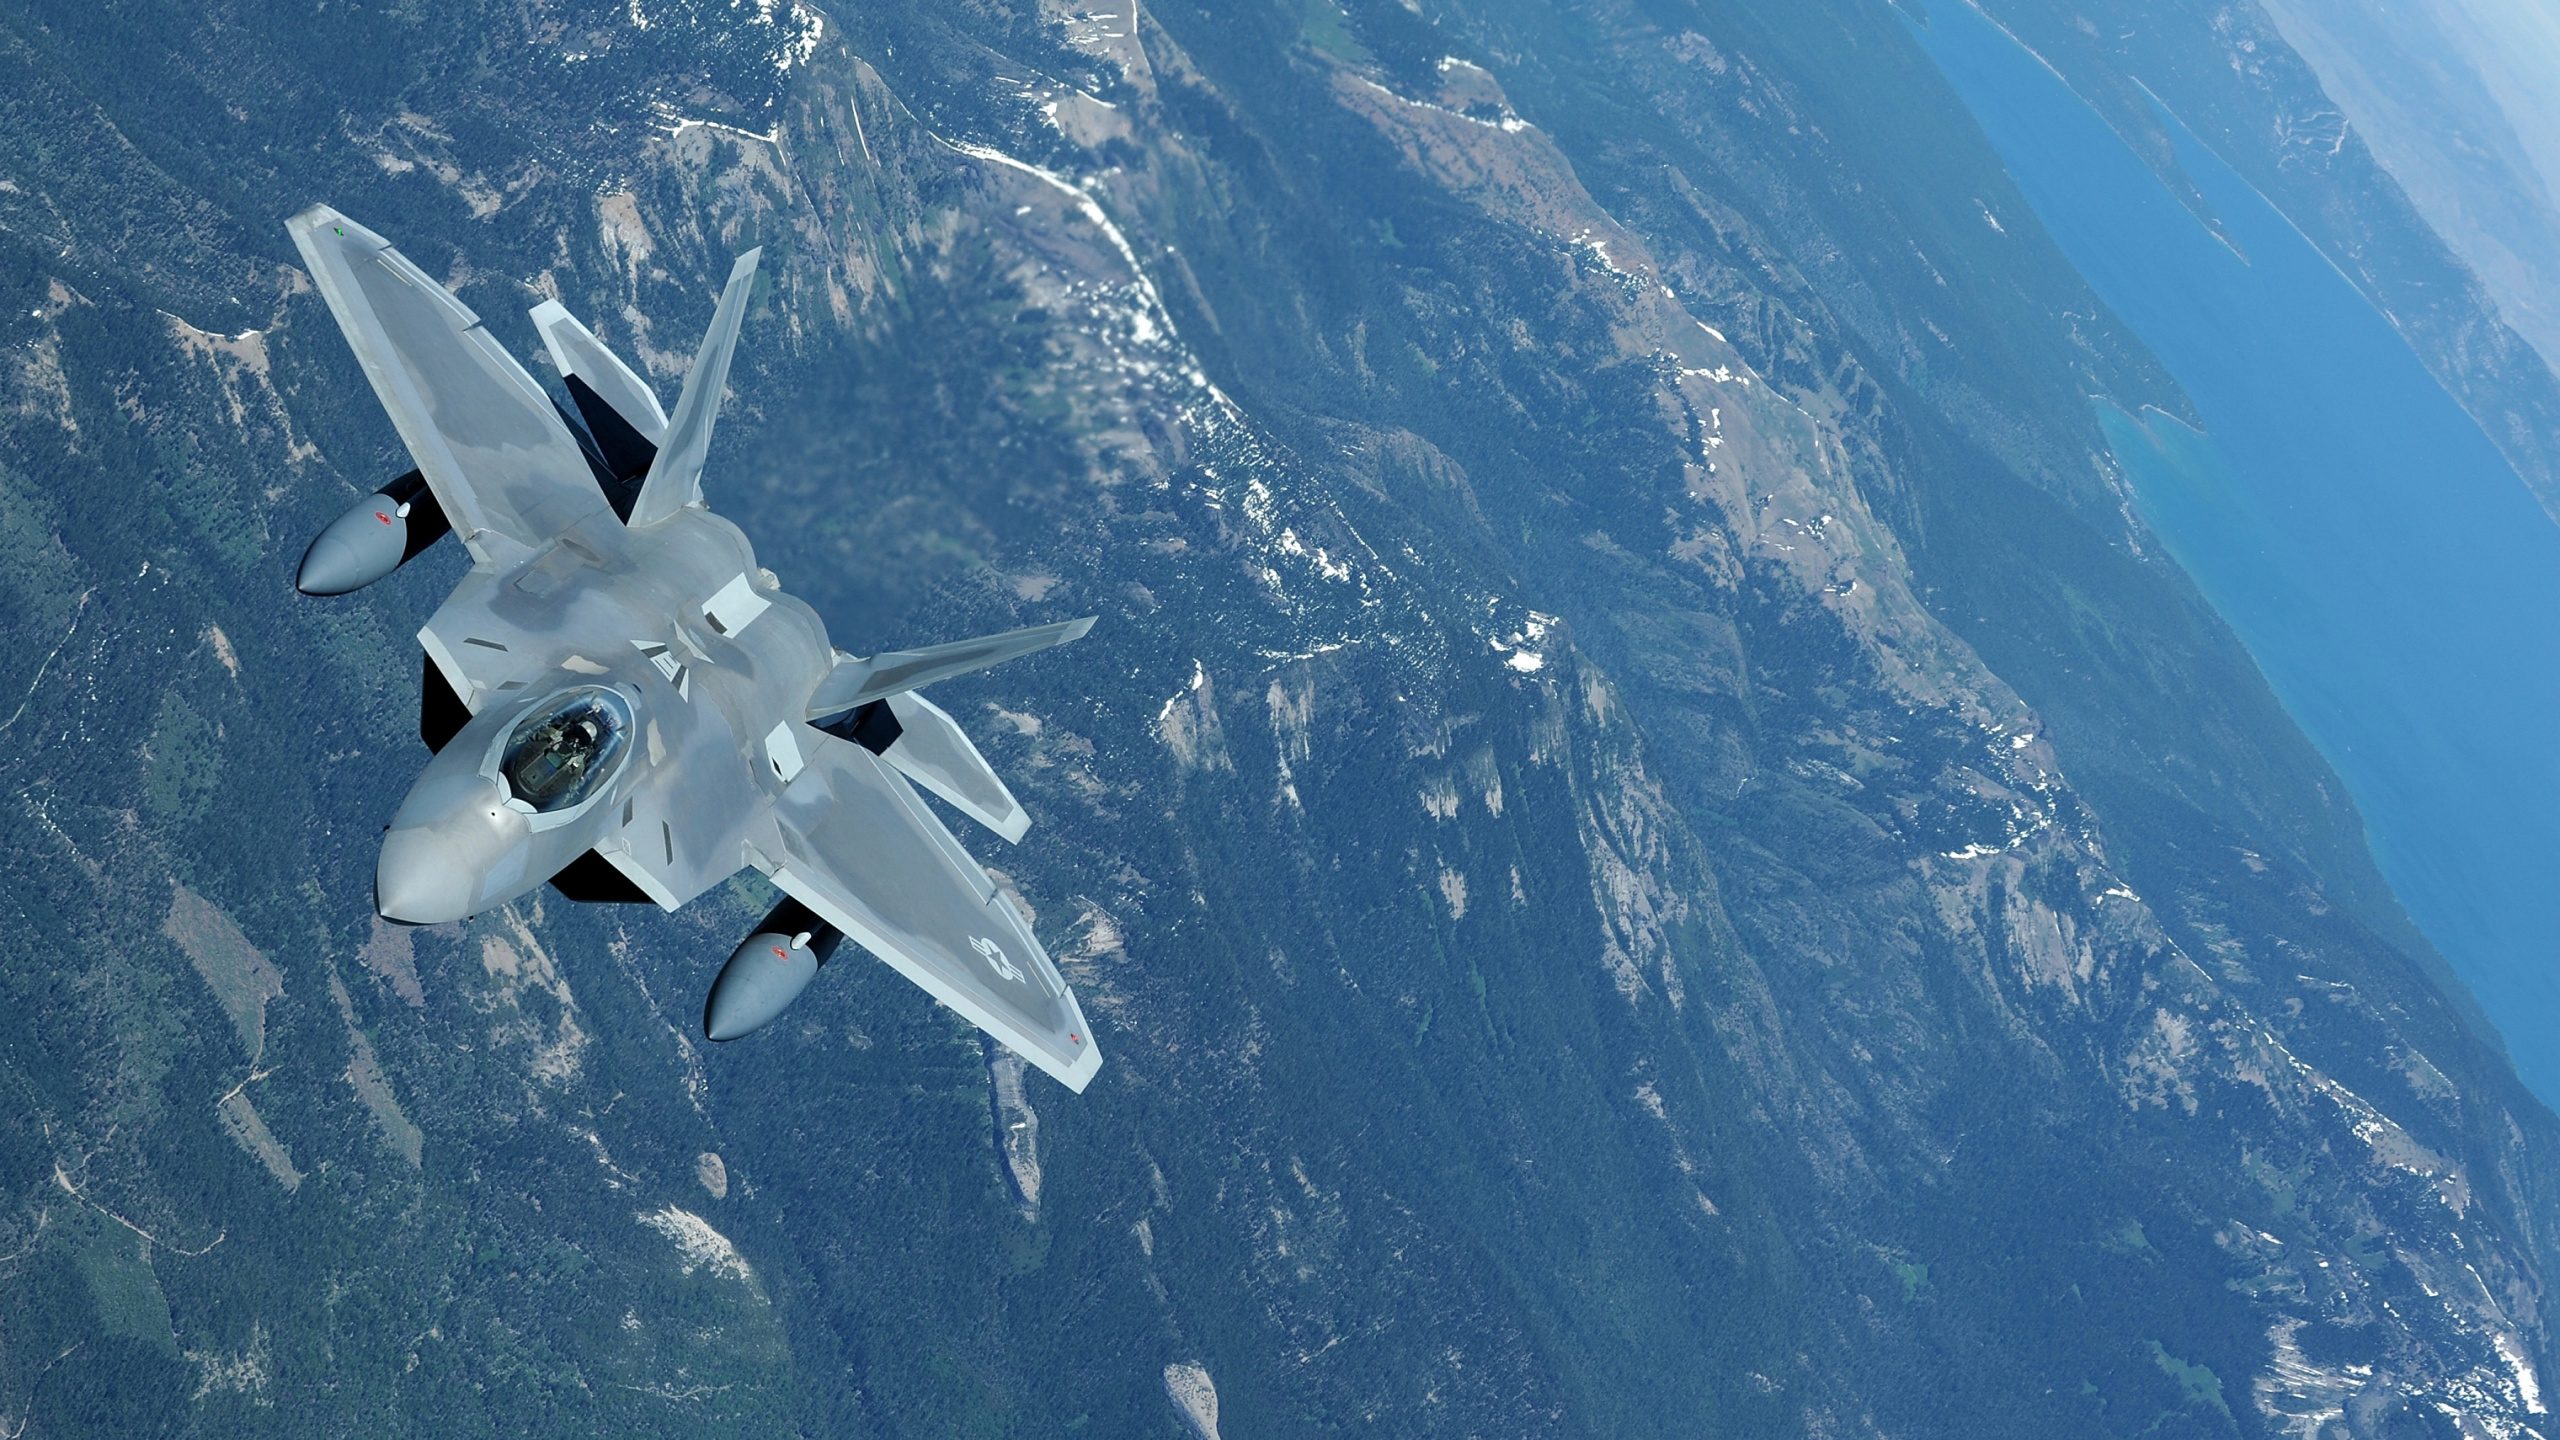 White Jet Plane Flying Over Blue and White Mountain. Wallpaper in 2560x1440 Resolution